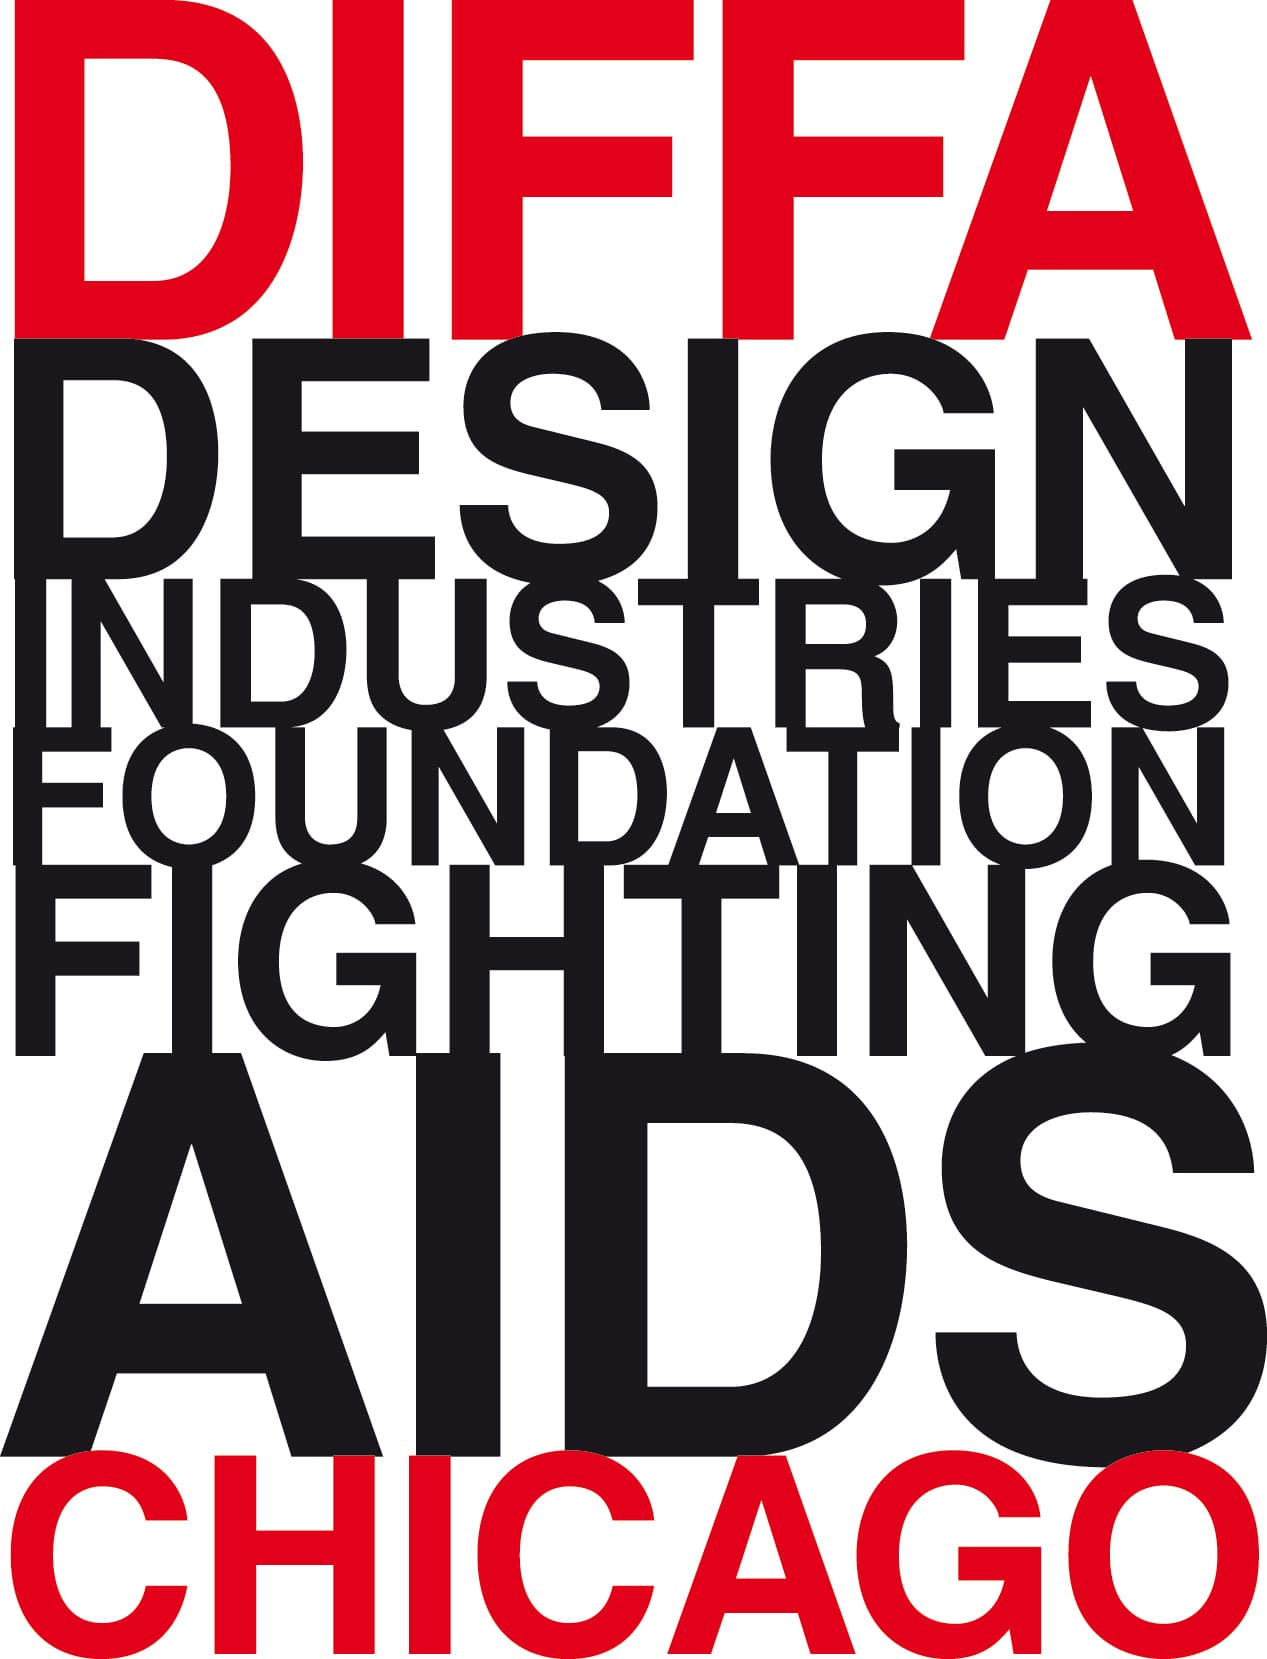 Link to Design Industries Foundation Fighting Aids Chicago (DIFFA)'s website